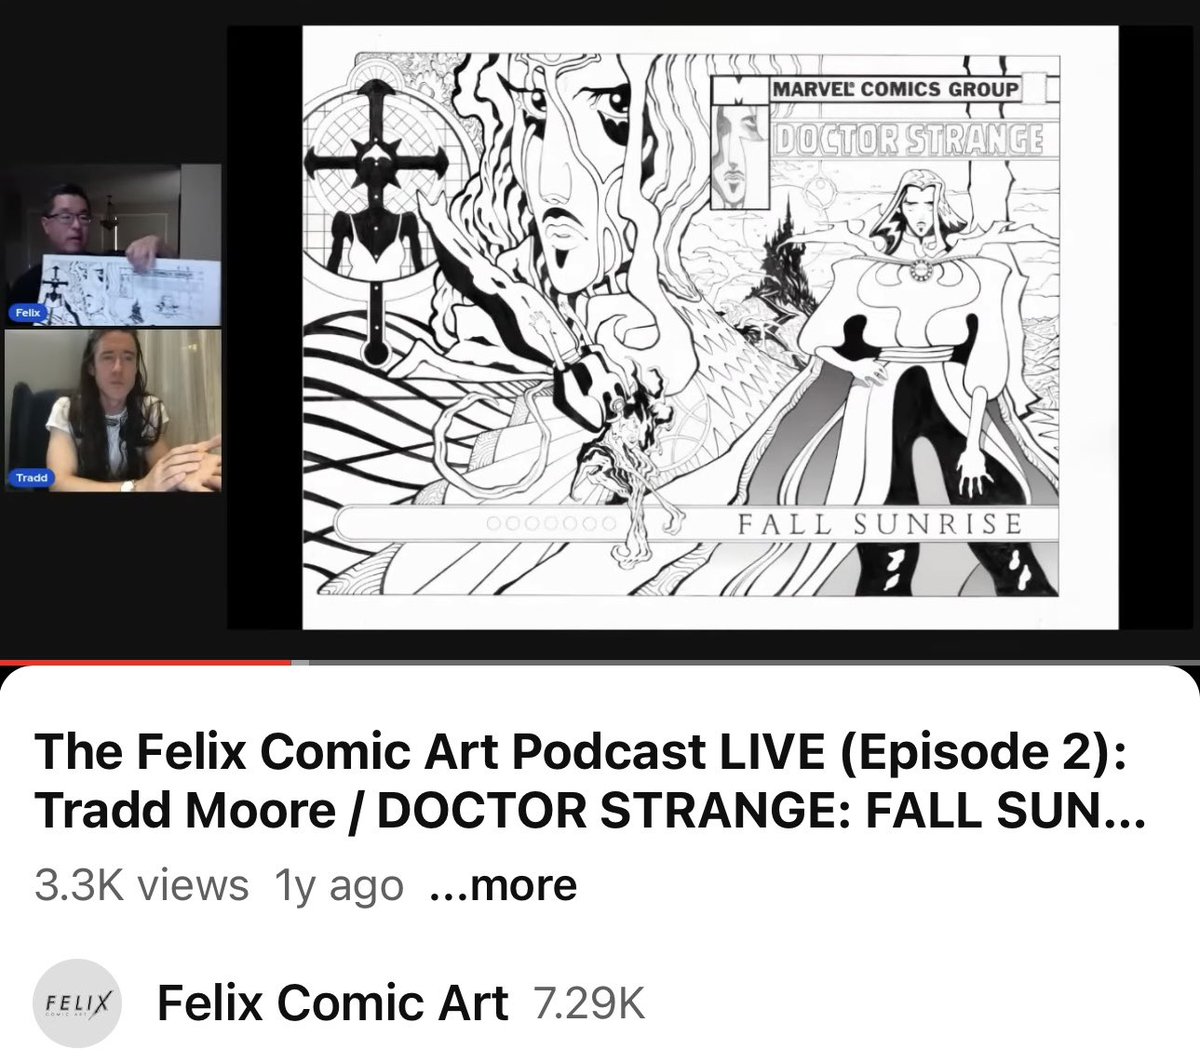 Throwback Thursday to our chat with art savant TRADD MOORE! The introduction of his visionary DOCTOR STRANGE: FALL SUNRISE original art to the world!: youtube.com/live/yvm1gIJLt… Hear in Tradd’s own words how he conceived DS:FS…and then delivered a work like no other. More soon!